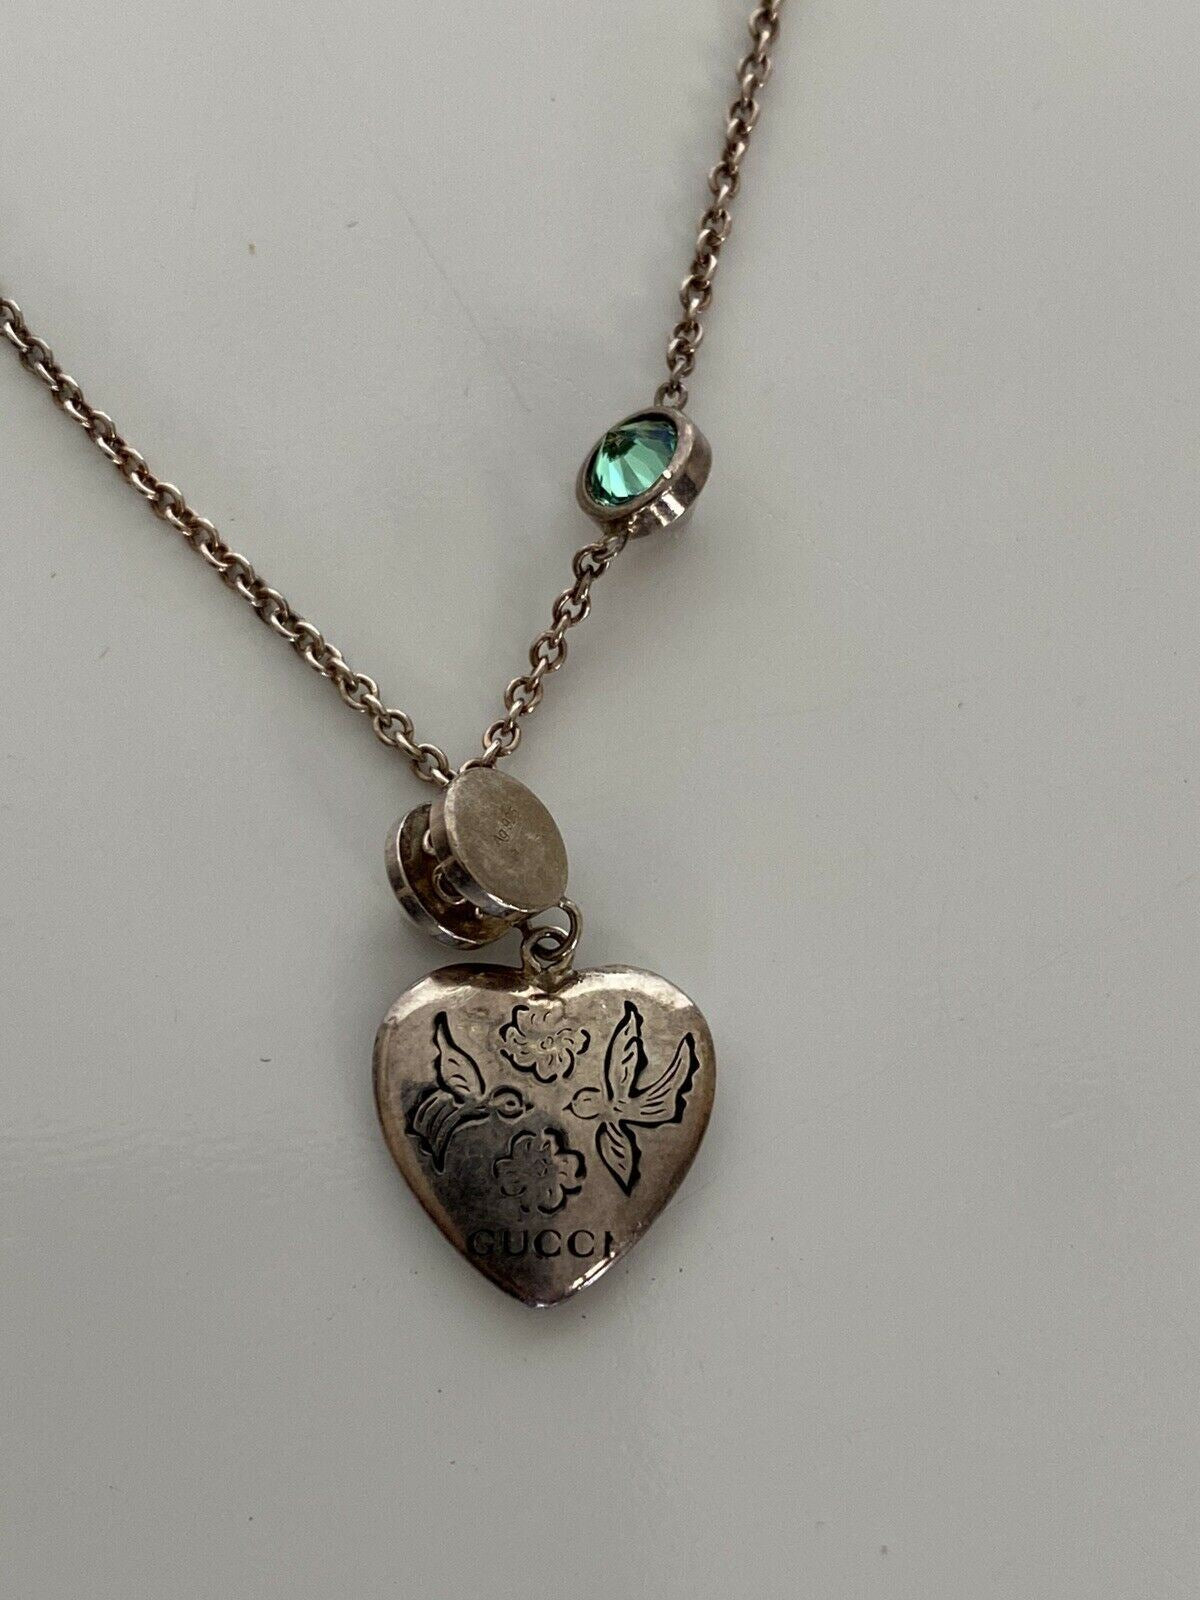 NEW Gucci Necklace Pendant Blind Pho Love Heart  Silver Sv925 Zirconia 502174